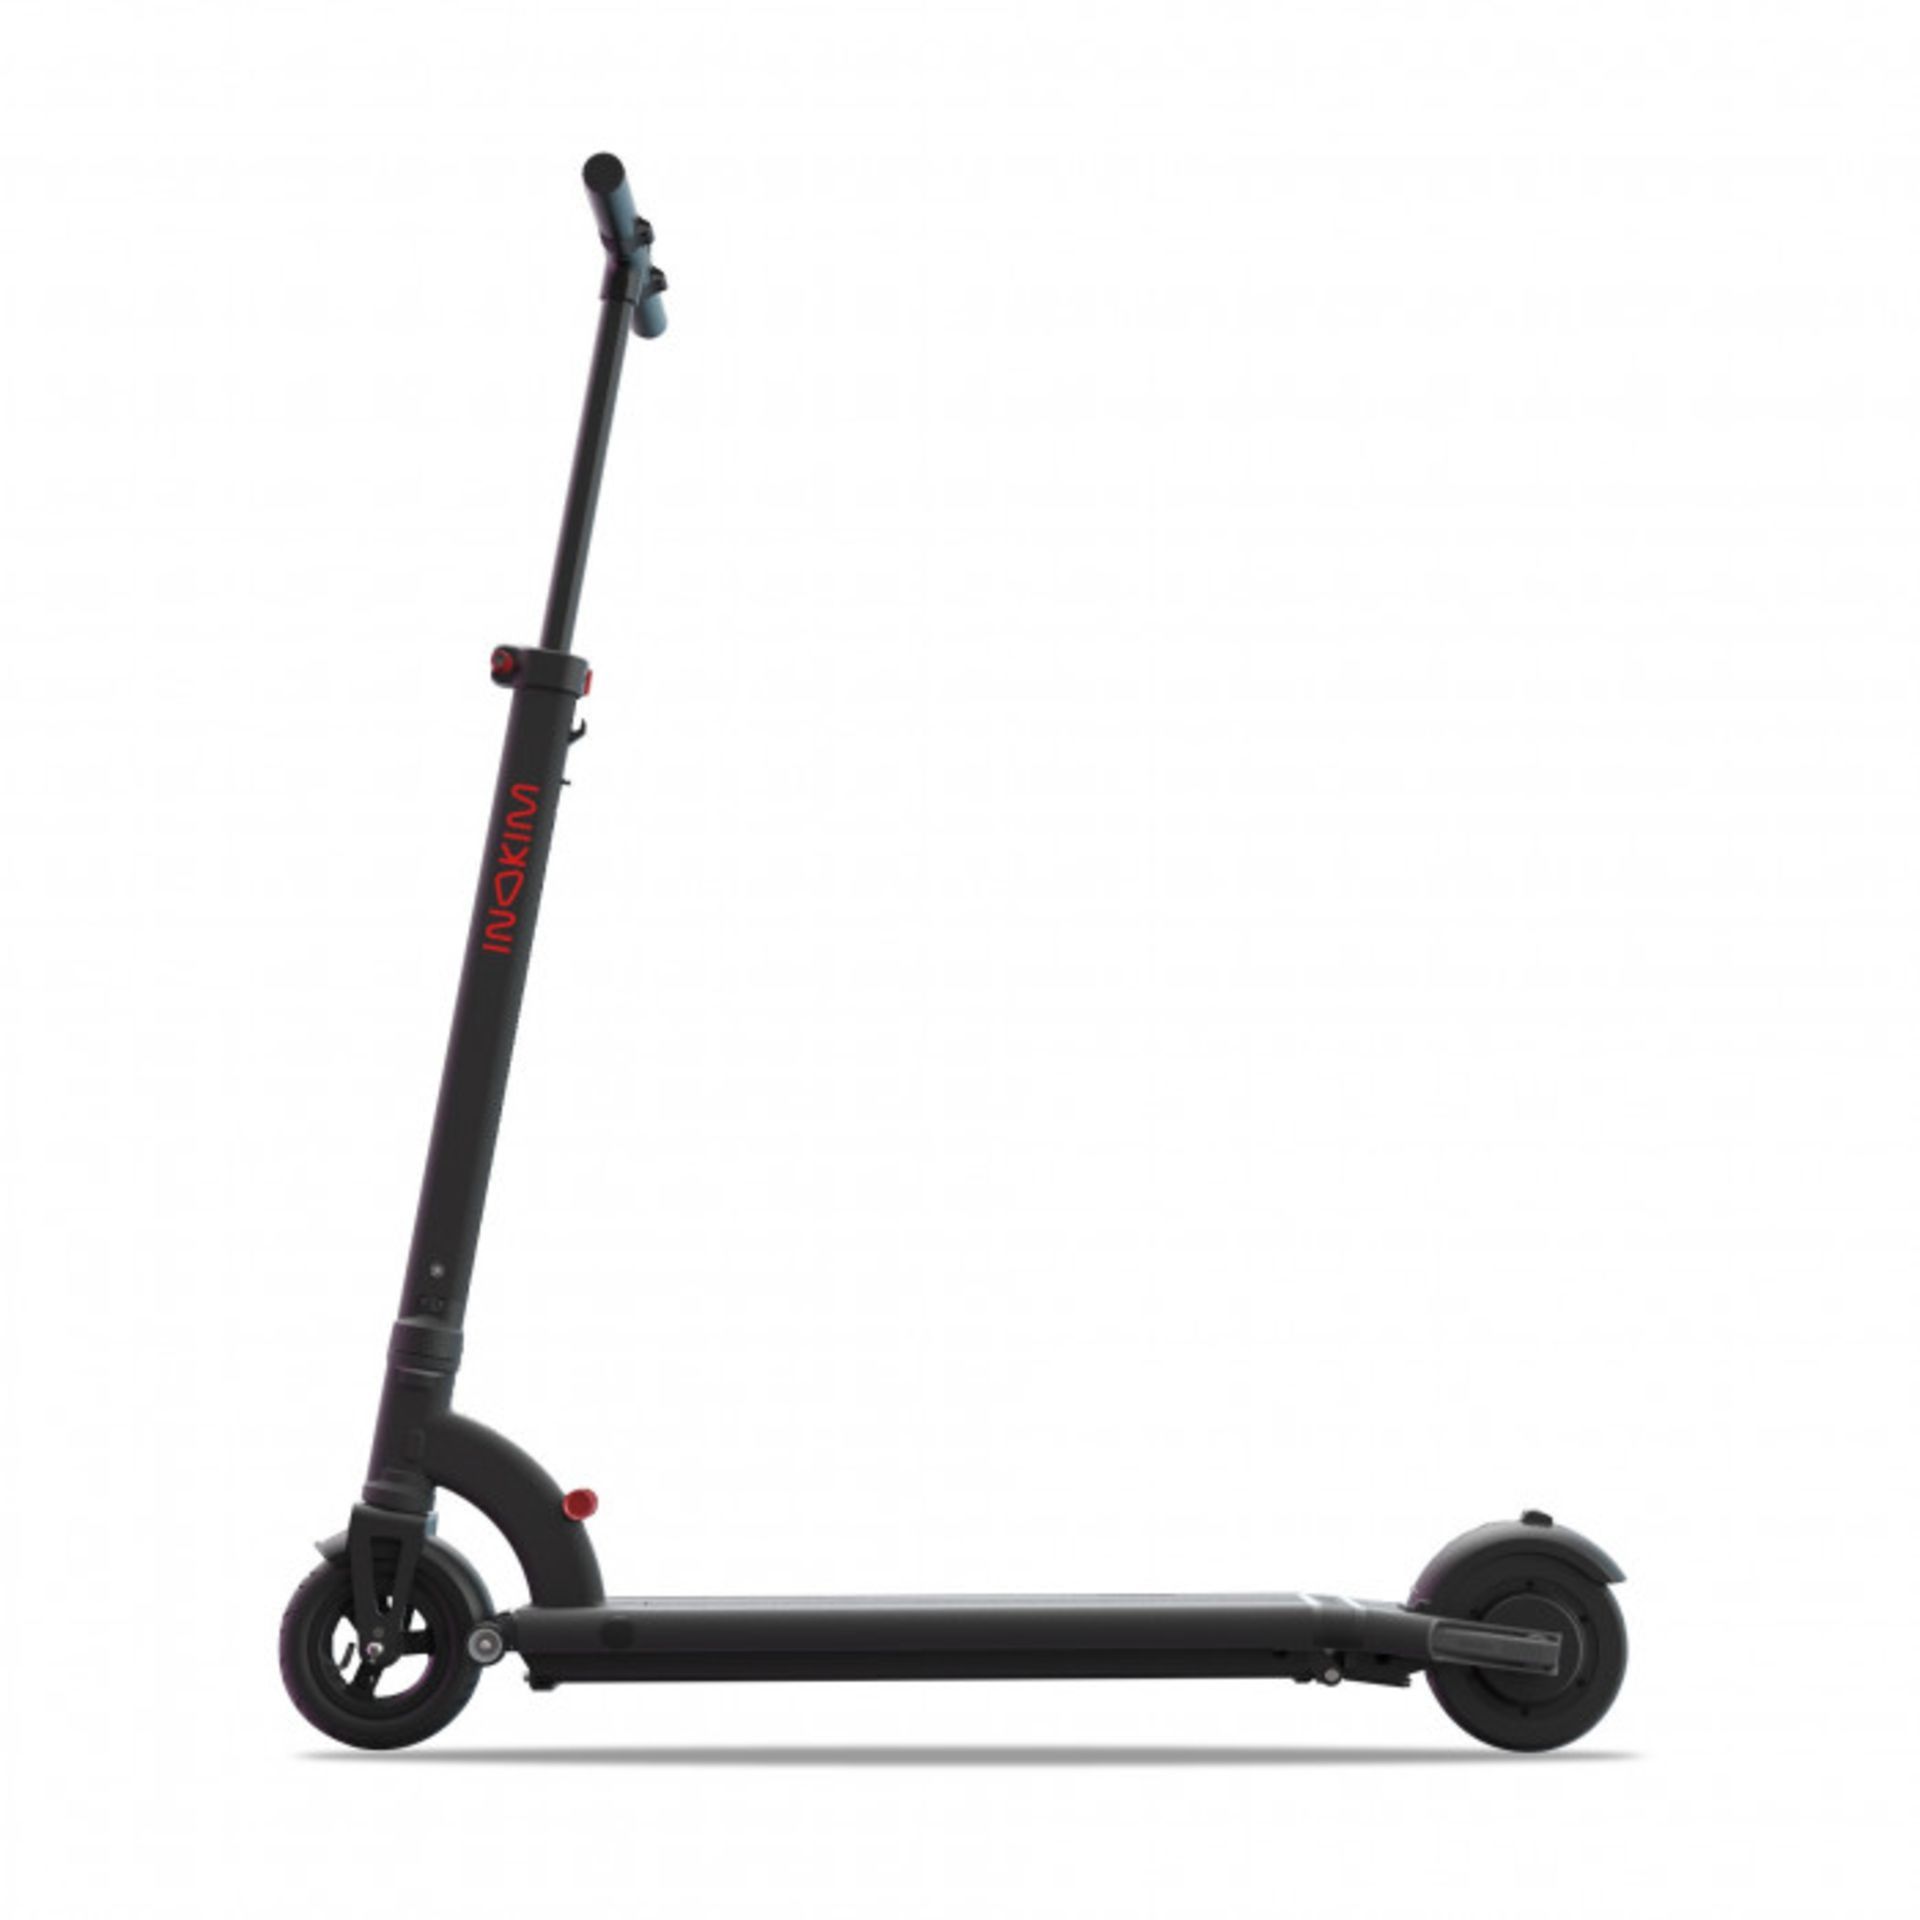 BRAND NEW INOKIM MINI FORCE BLACK 1'SELECTRIC SCOOTER (BLACK) RRP £559 - Image 2 of 2